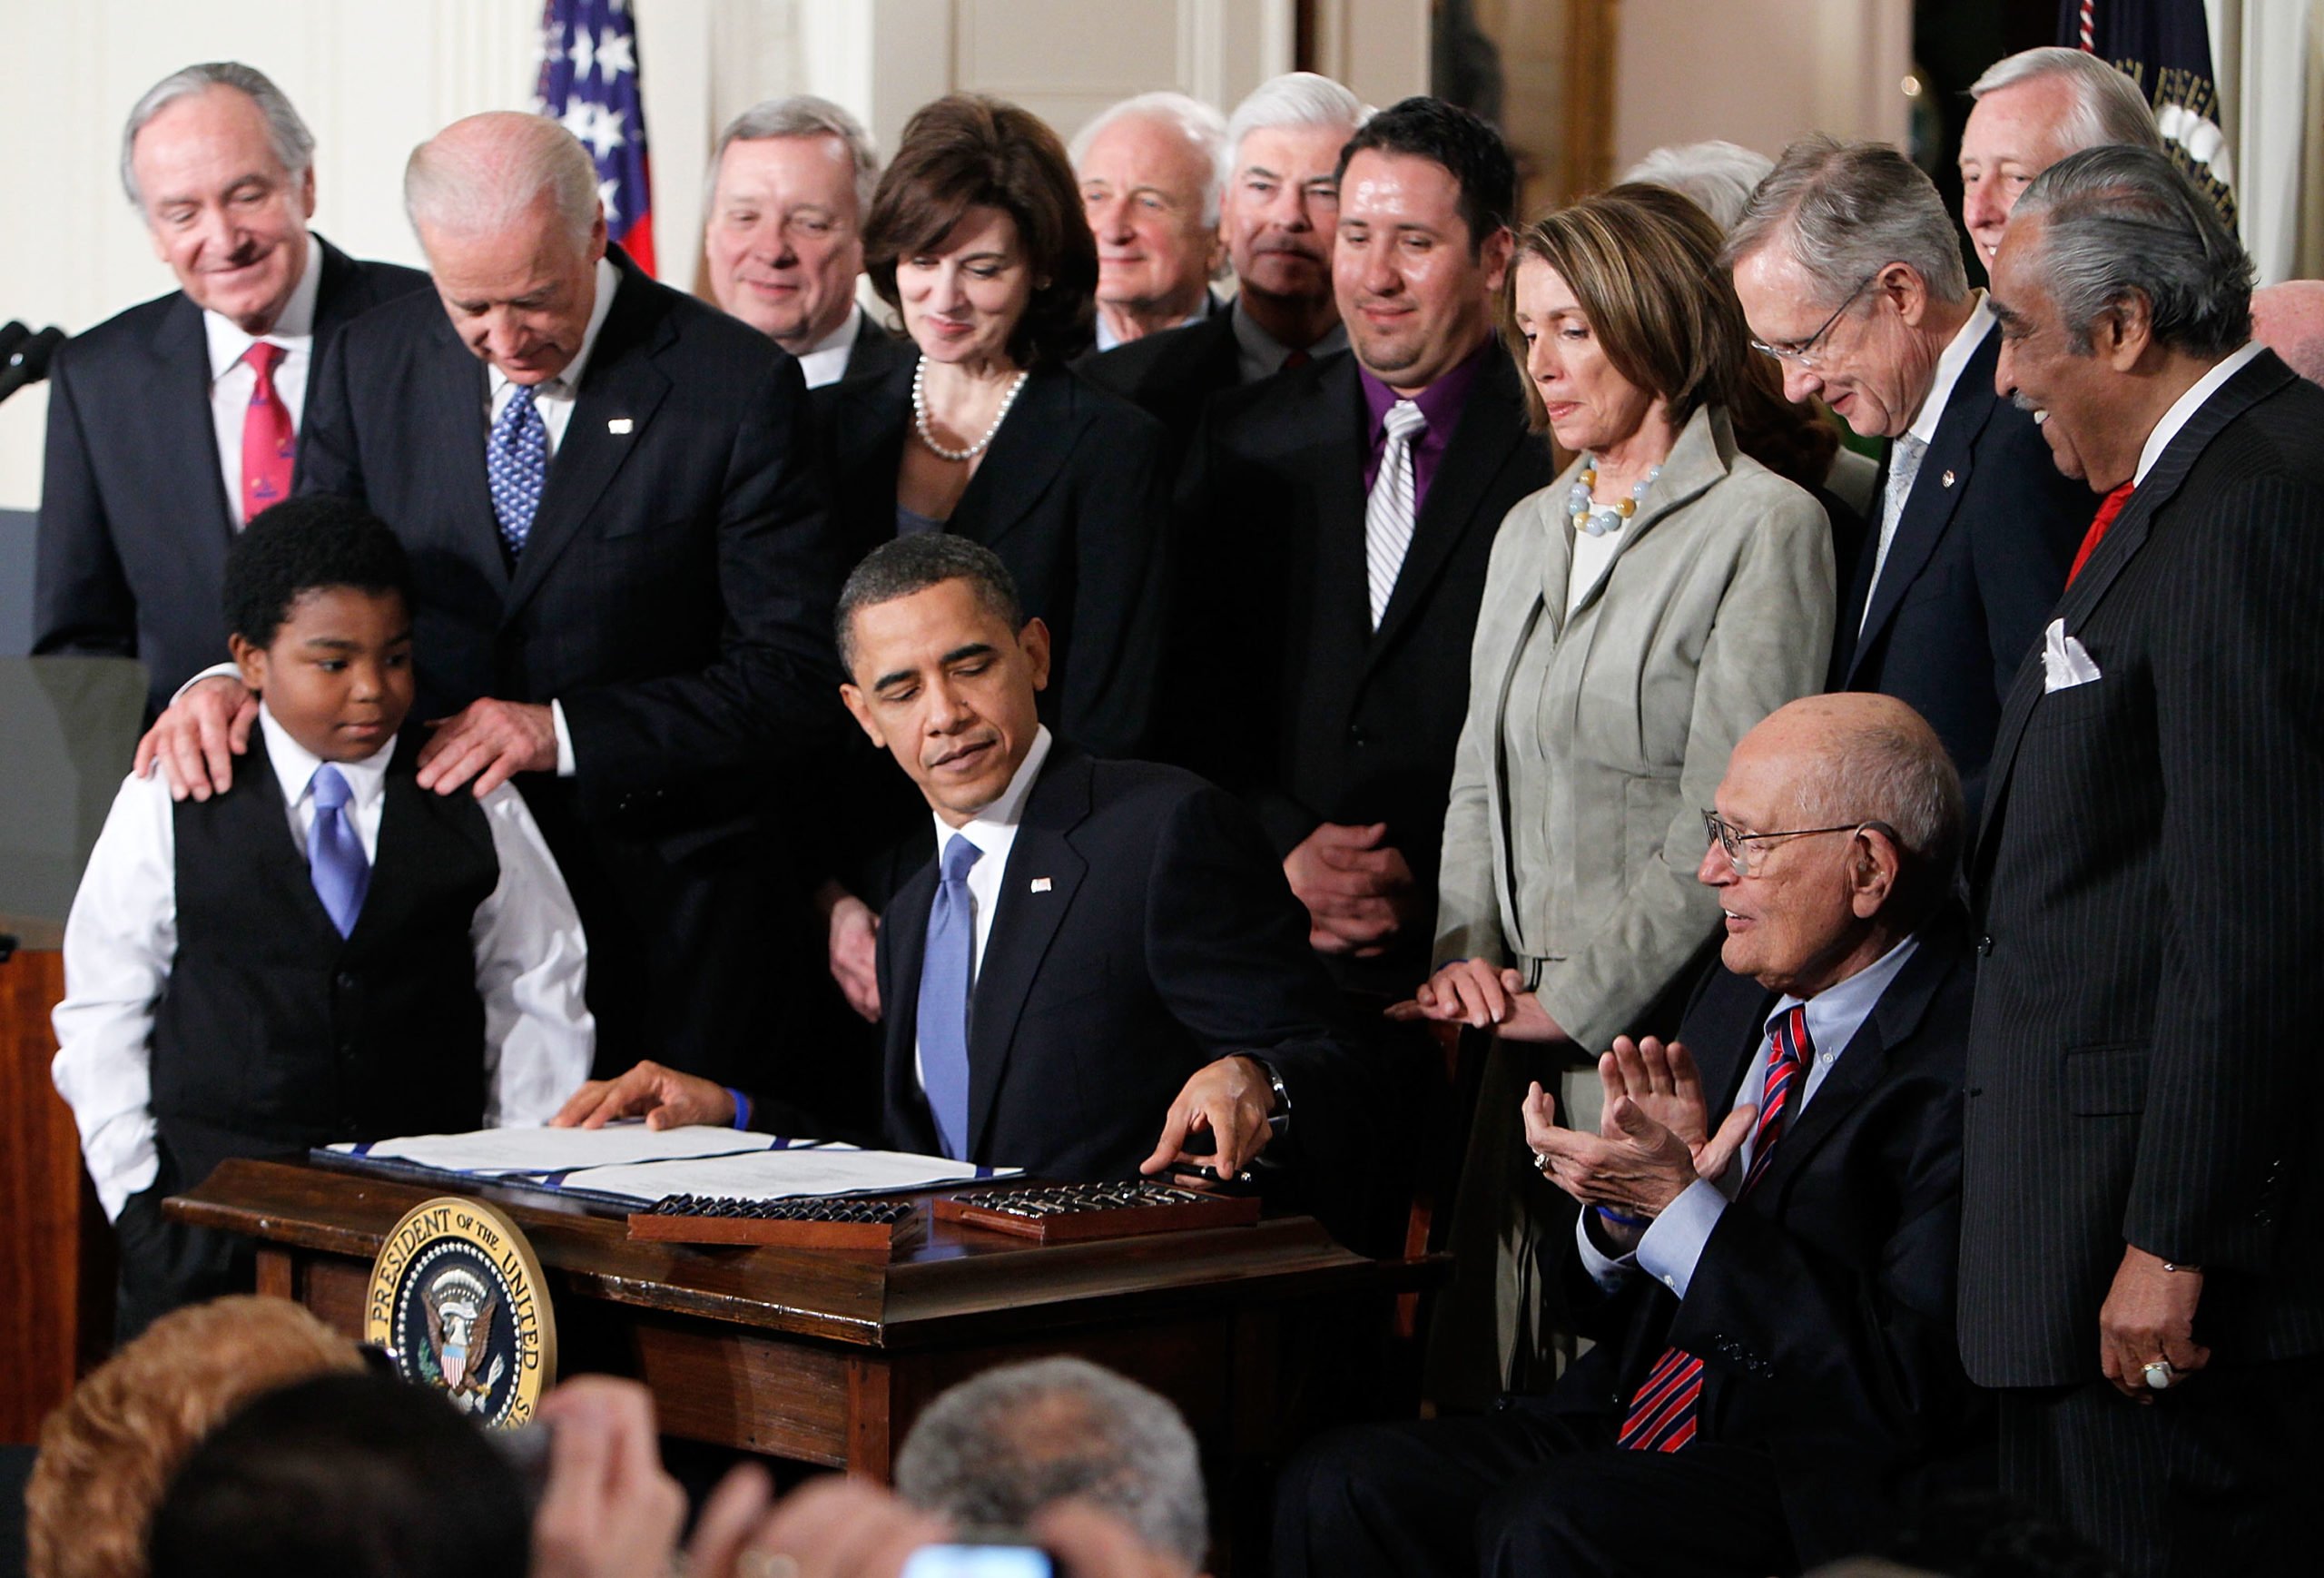 President Barack Obama signs the Affordable Health Care for America Act during a ceremony with fellow Democrats in the East Room of the White House March 23, 2010 in Washington, DC. (Alex Wong/Getty Images)